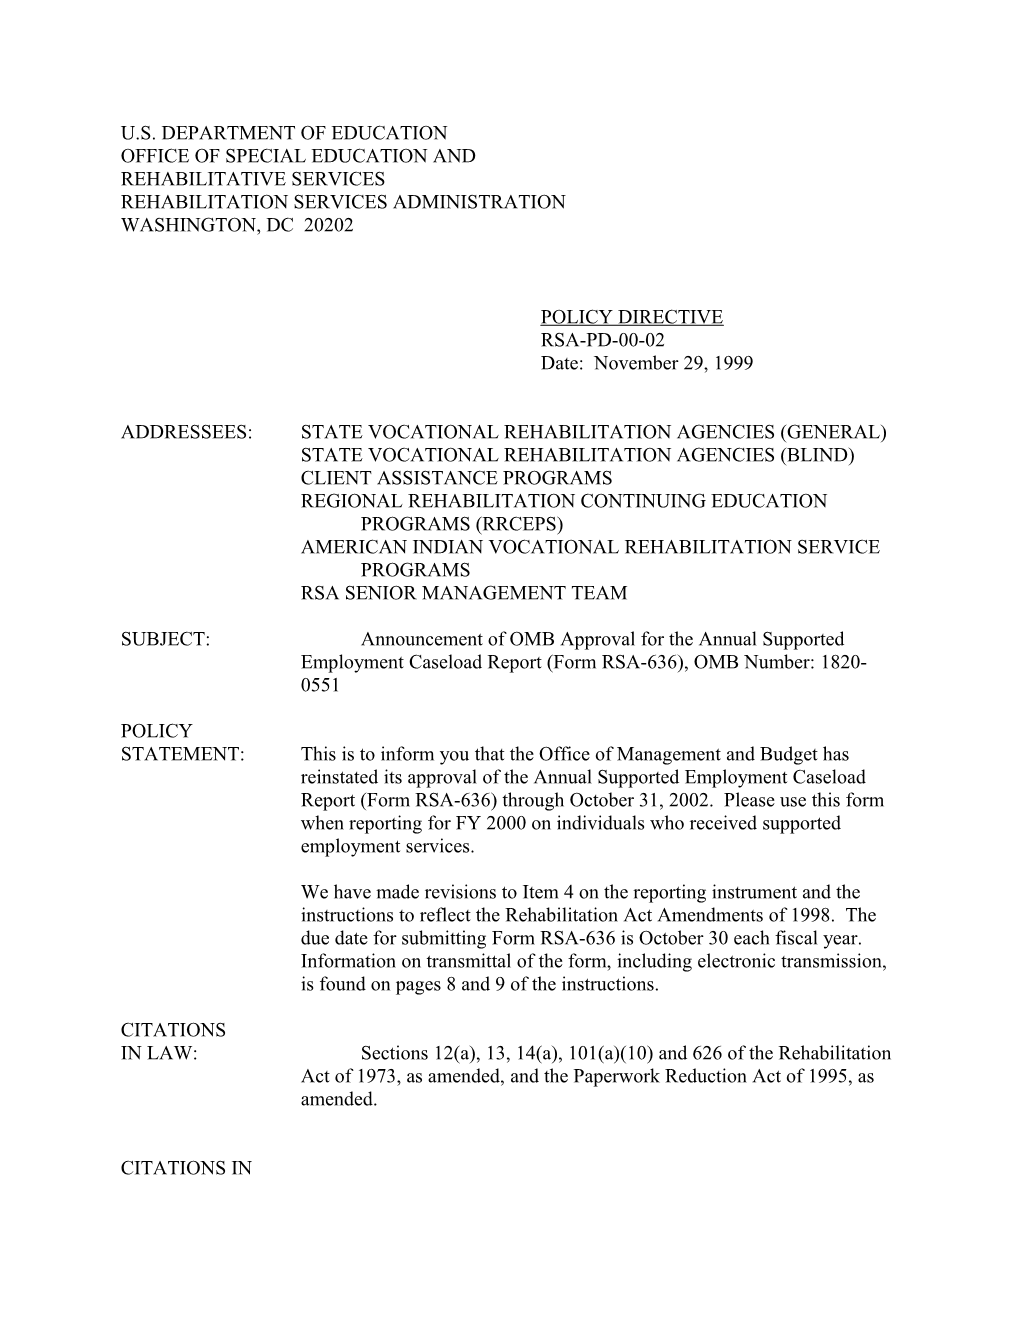 RSA-PD-00-02 Announcement of OMB Approval for the Annual Supported Employment Caseload